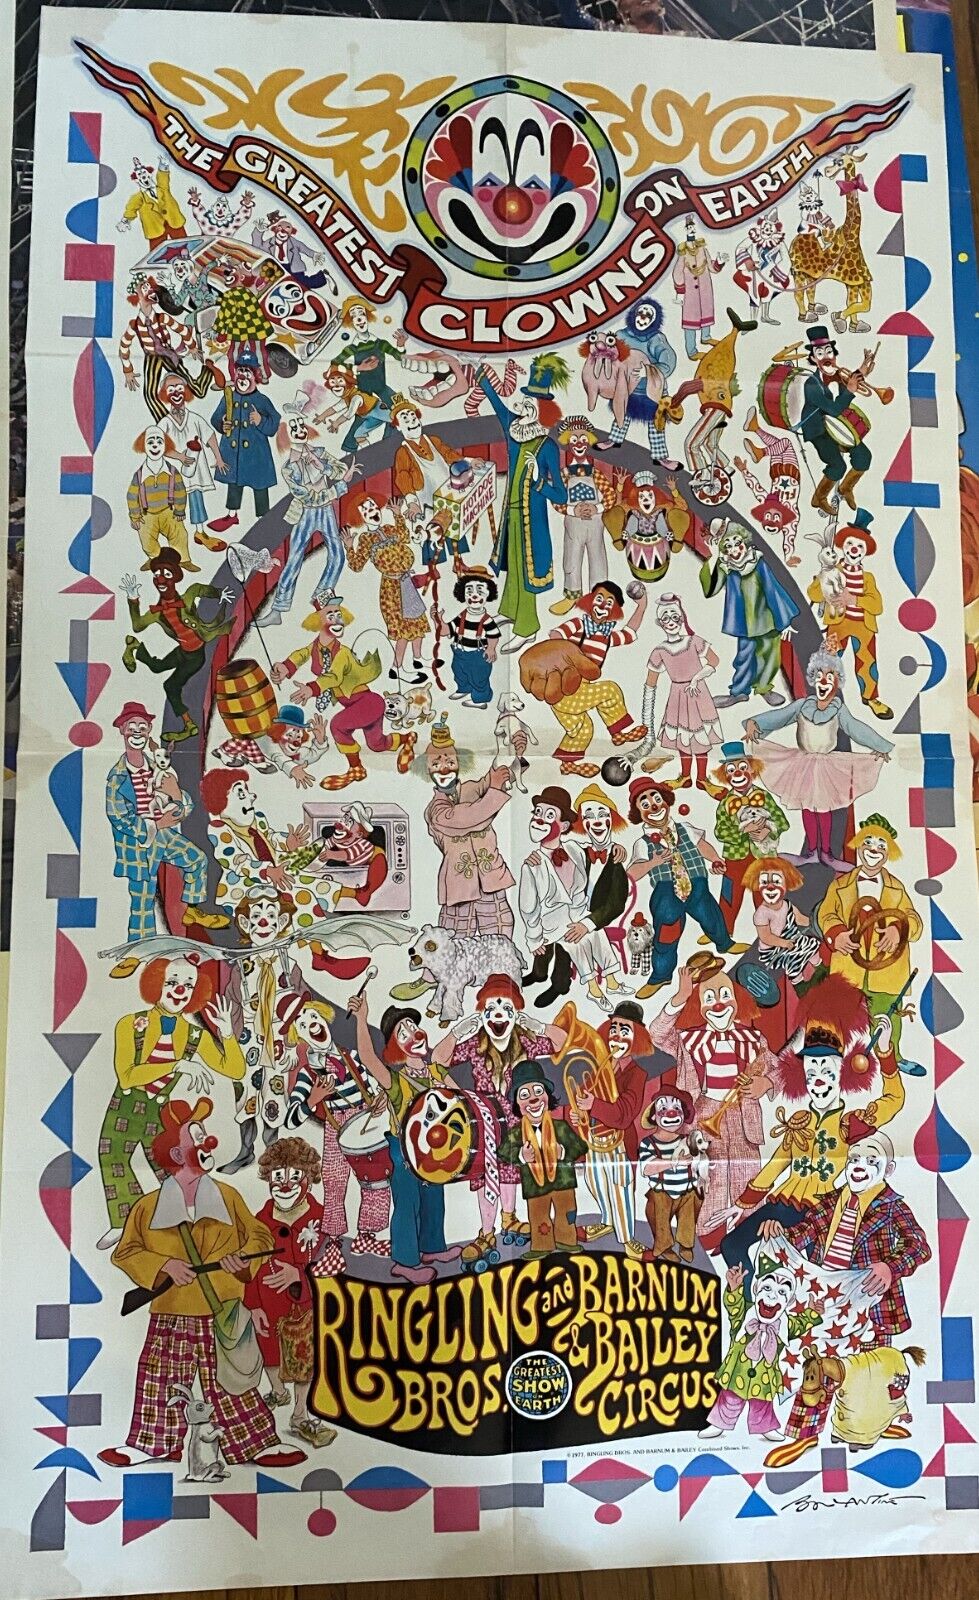 Authentic 1977 Ringling Bros Barnum & Bailey Circus Poster GREATEST CLOWNS